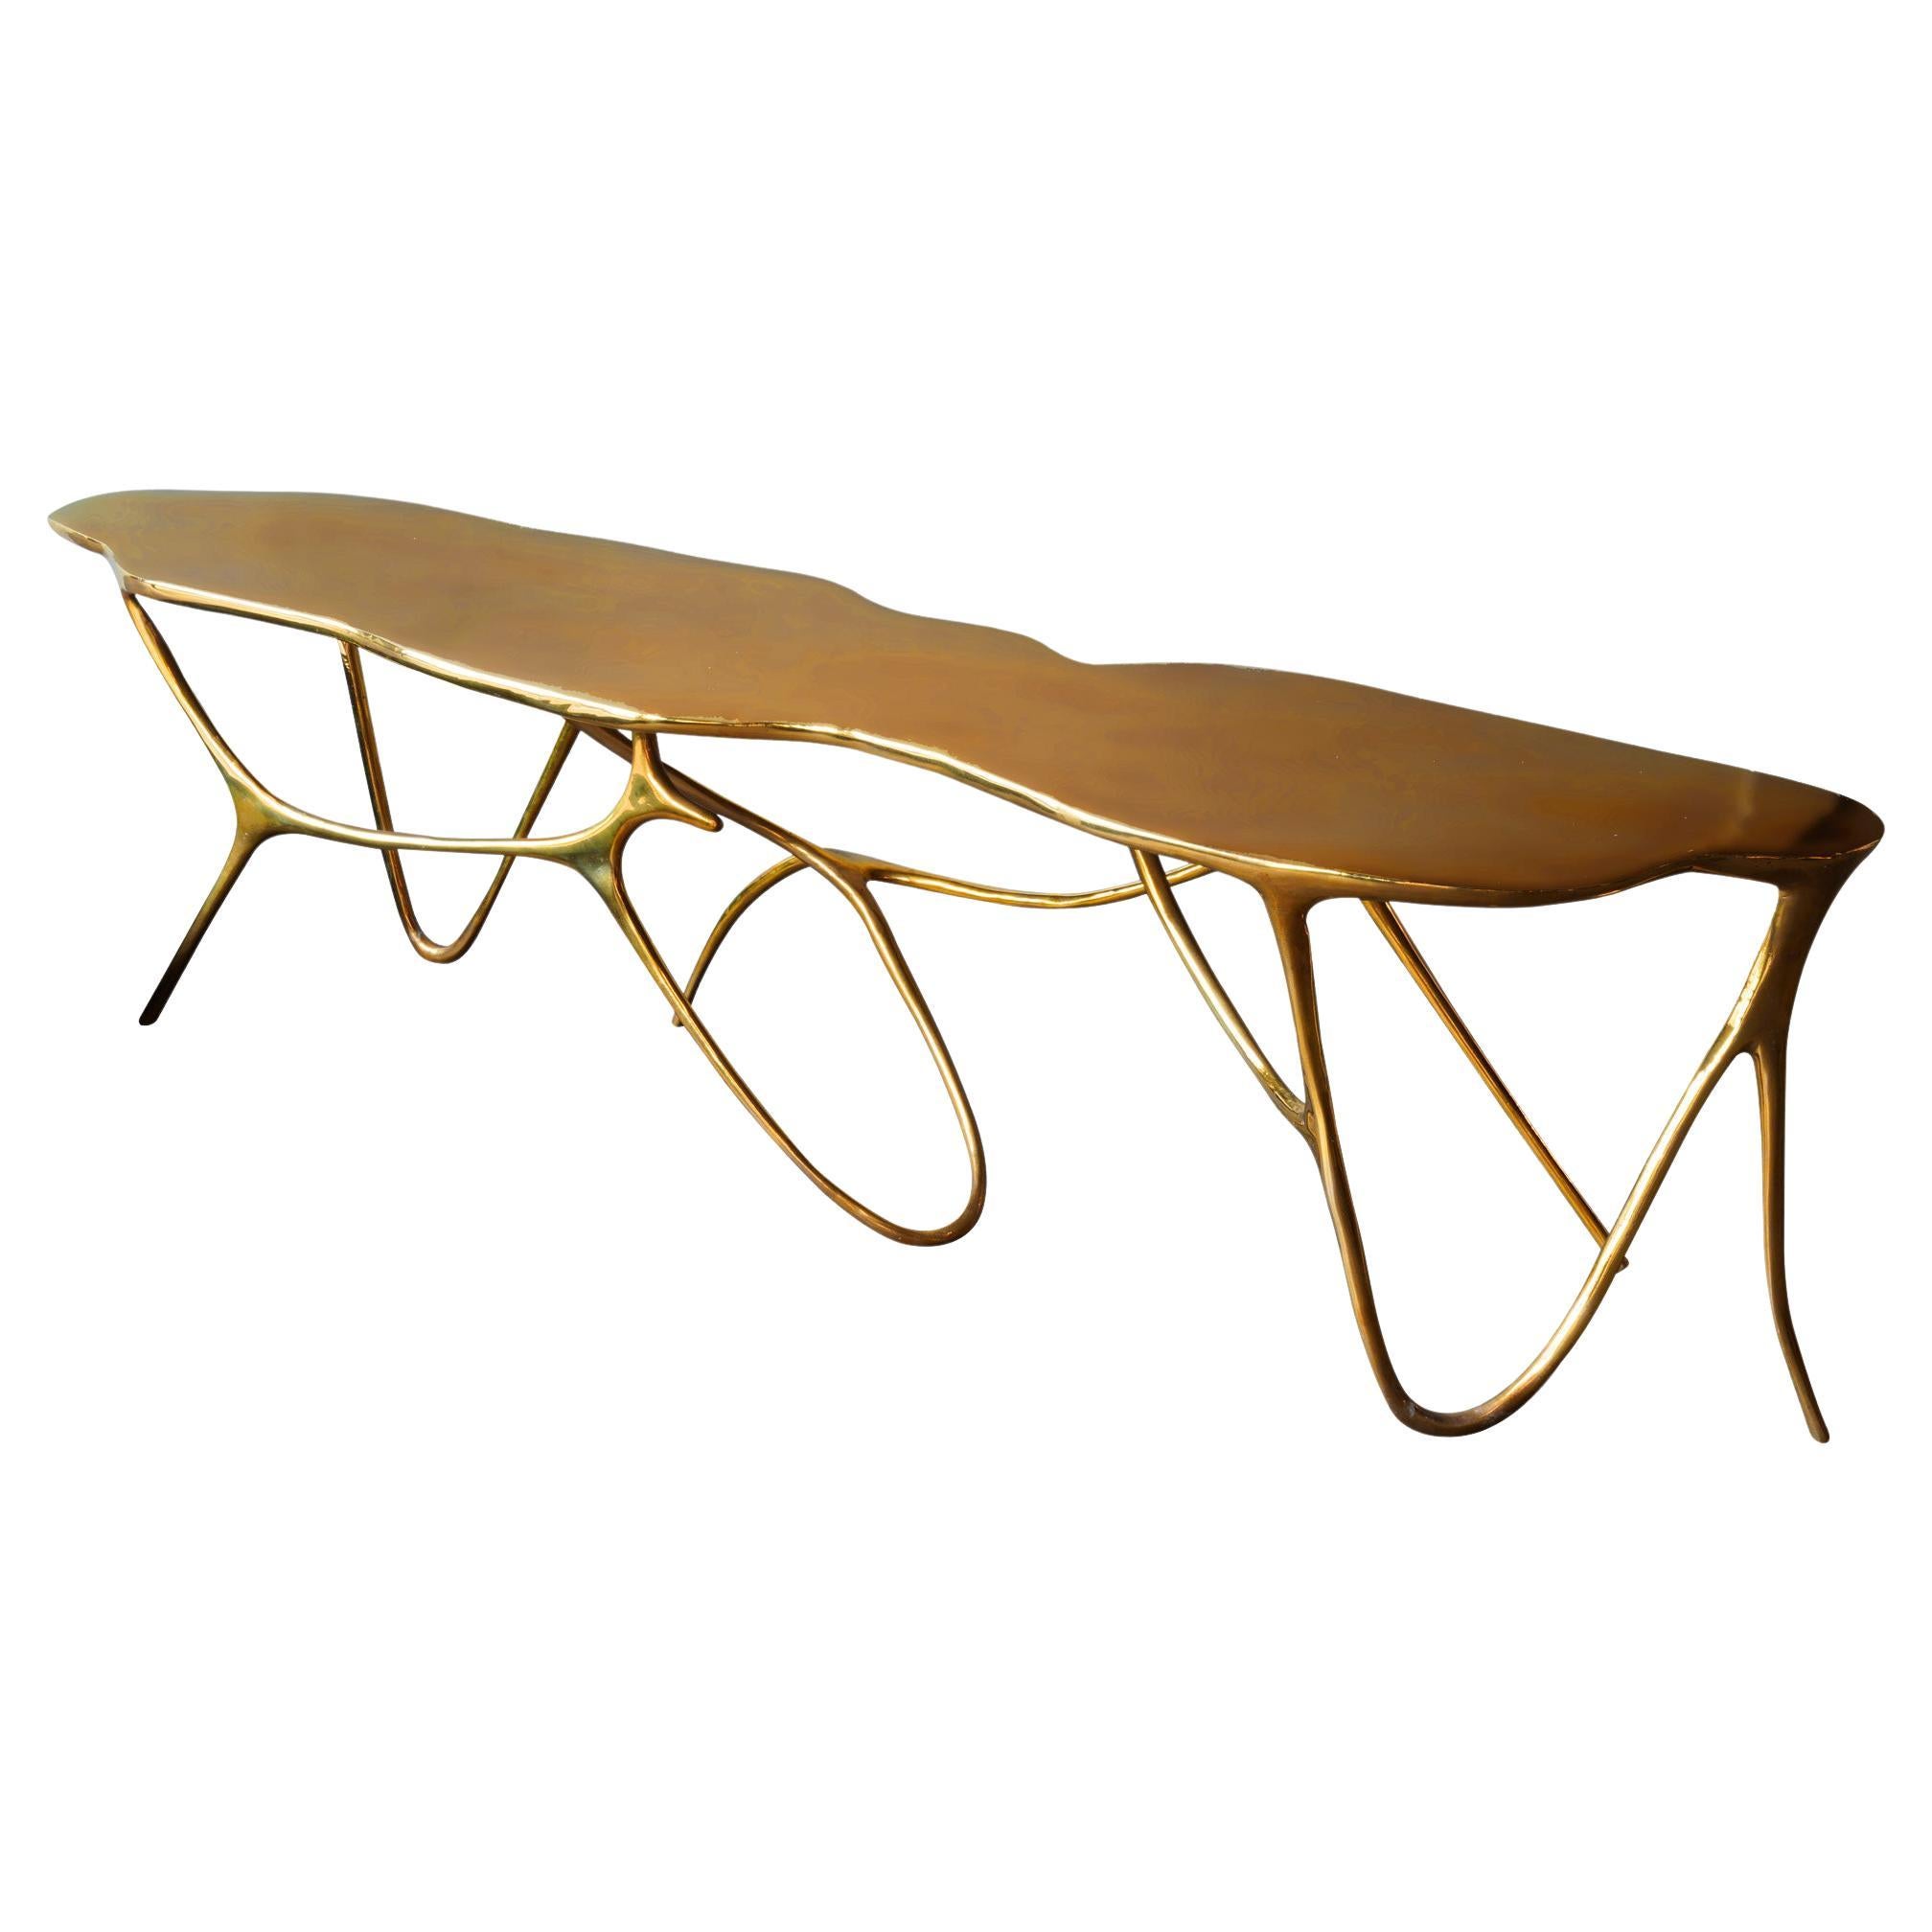 Script Bronze Table or Bench For Sale